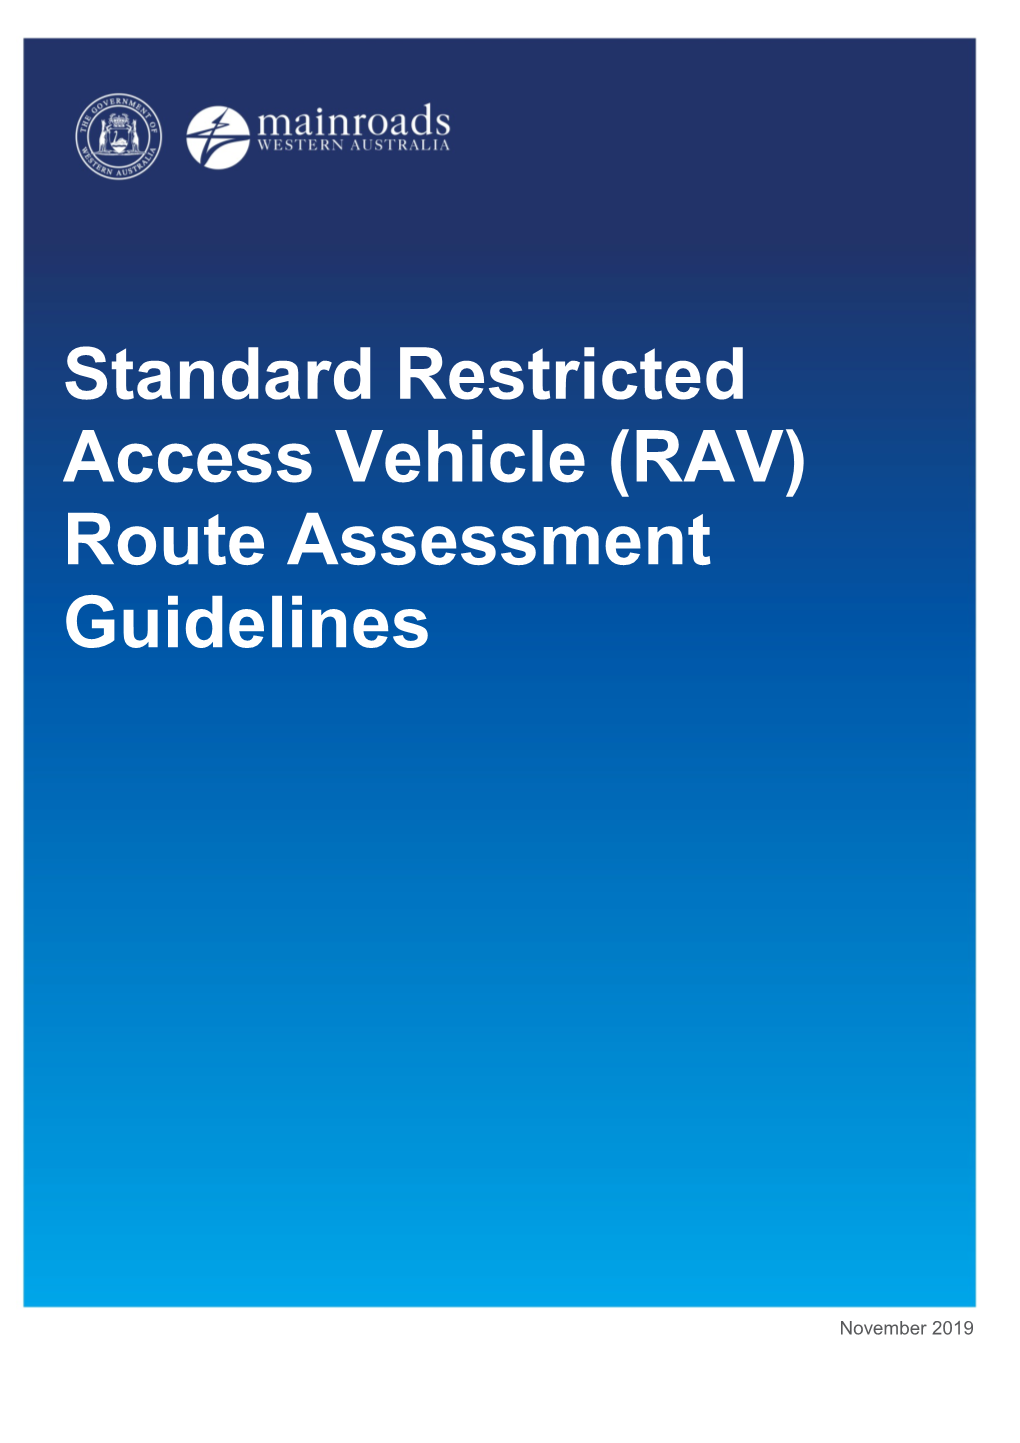 Standard Restricted Access Vehicle (RAV) Route Assessment Guidelines